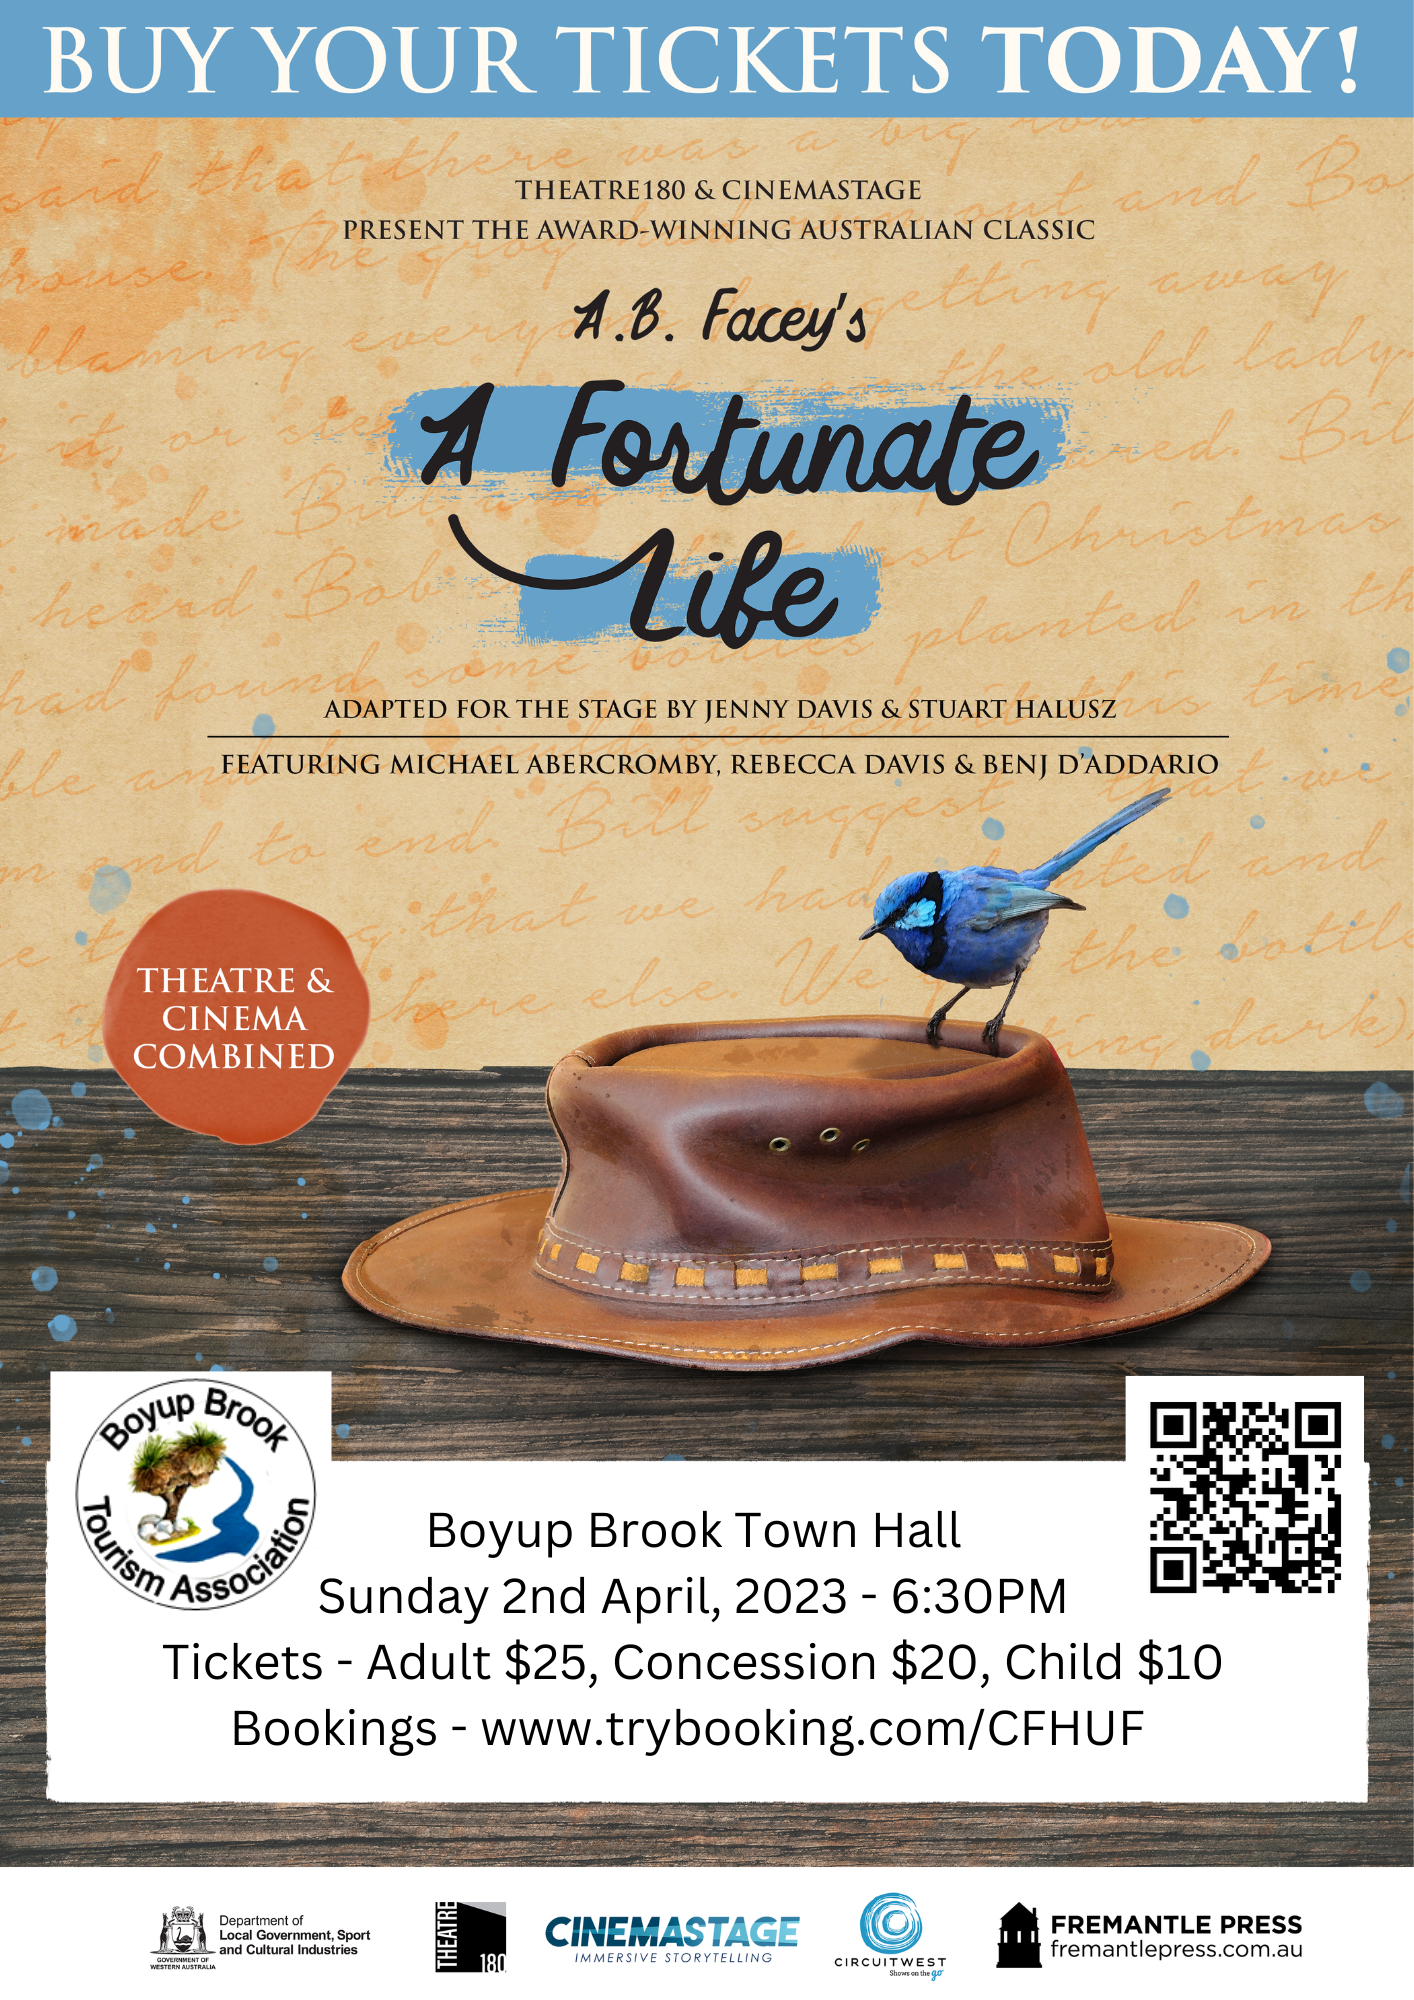 'A Fortunate Life' by A.B. Facey stage performance